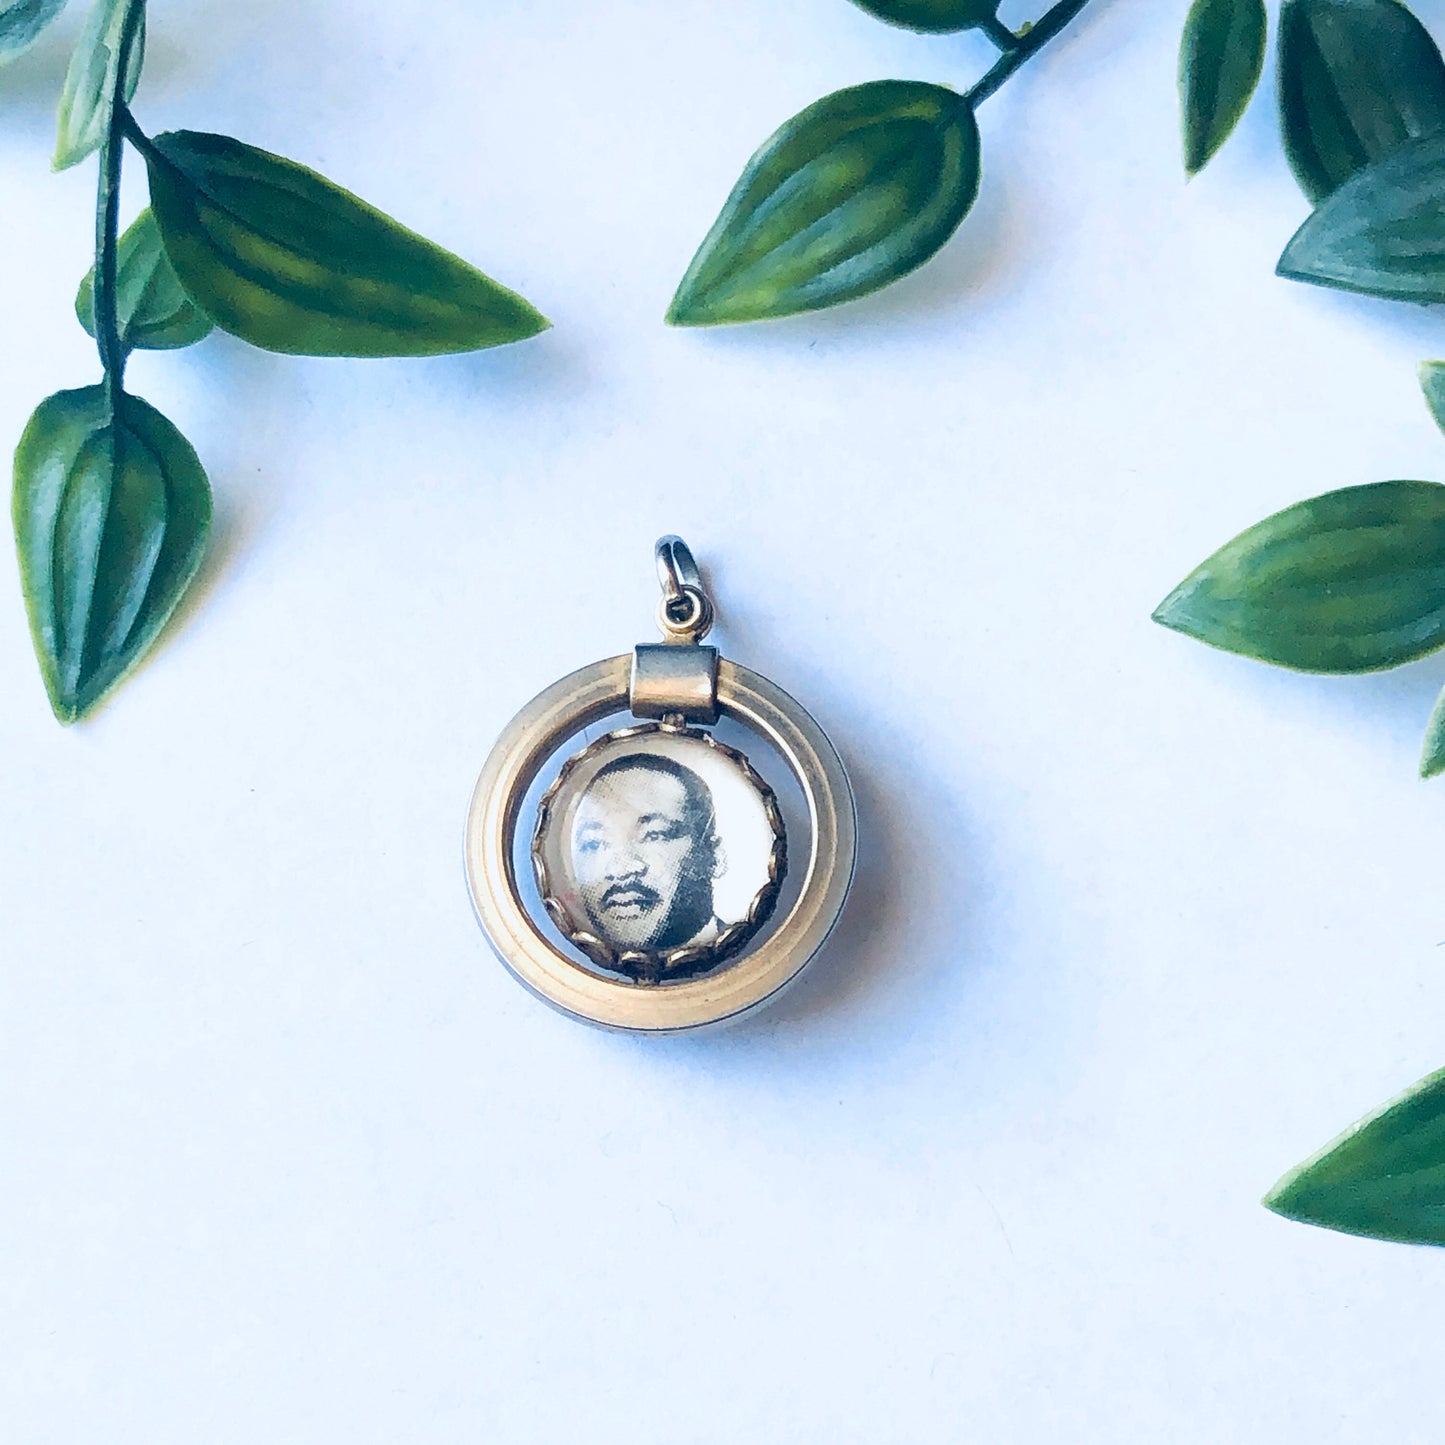 Vintage gold-toned Martin Luther King Jr. spinner pendant with 'I Have a Dream' inscription on a white background surrounded by green leaves, unique memorial jewelry.